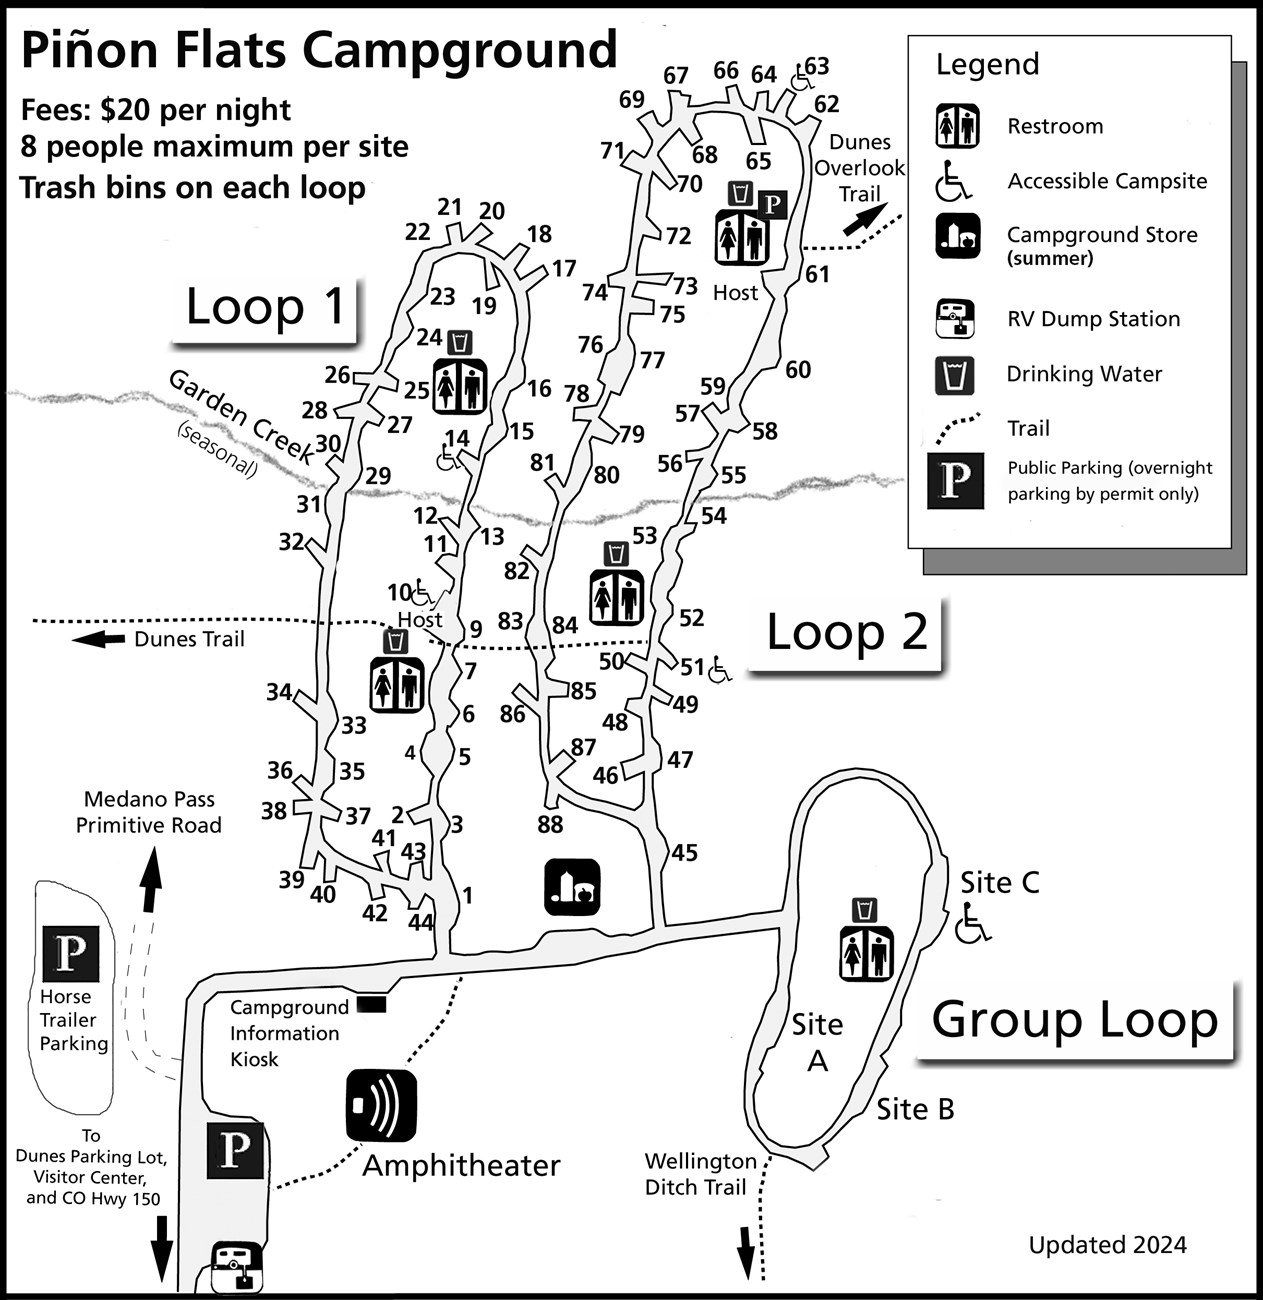 A black and white map of Pinon Flats Campground